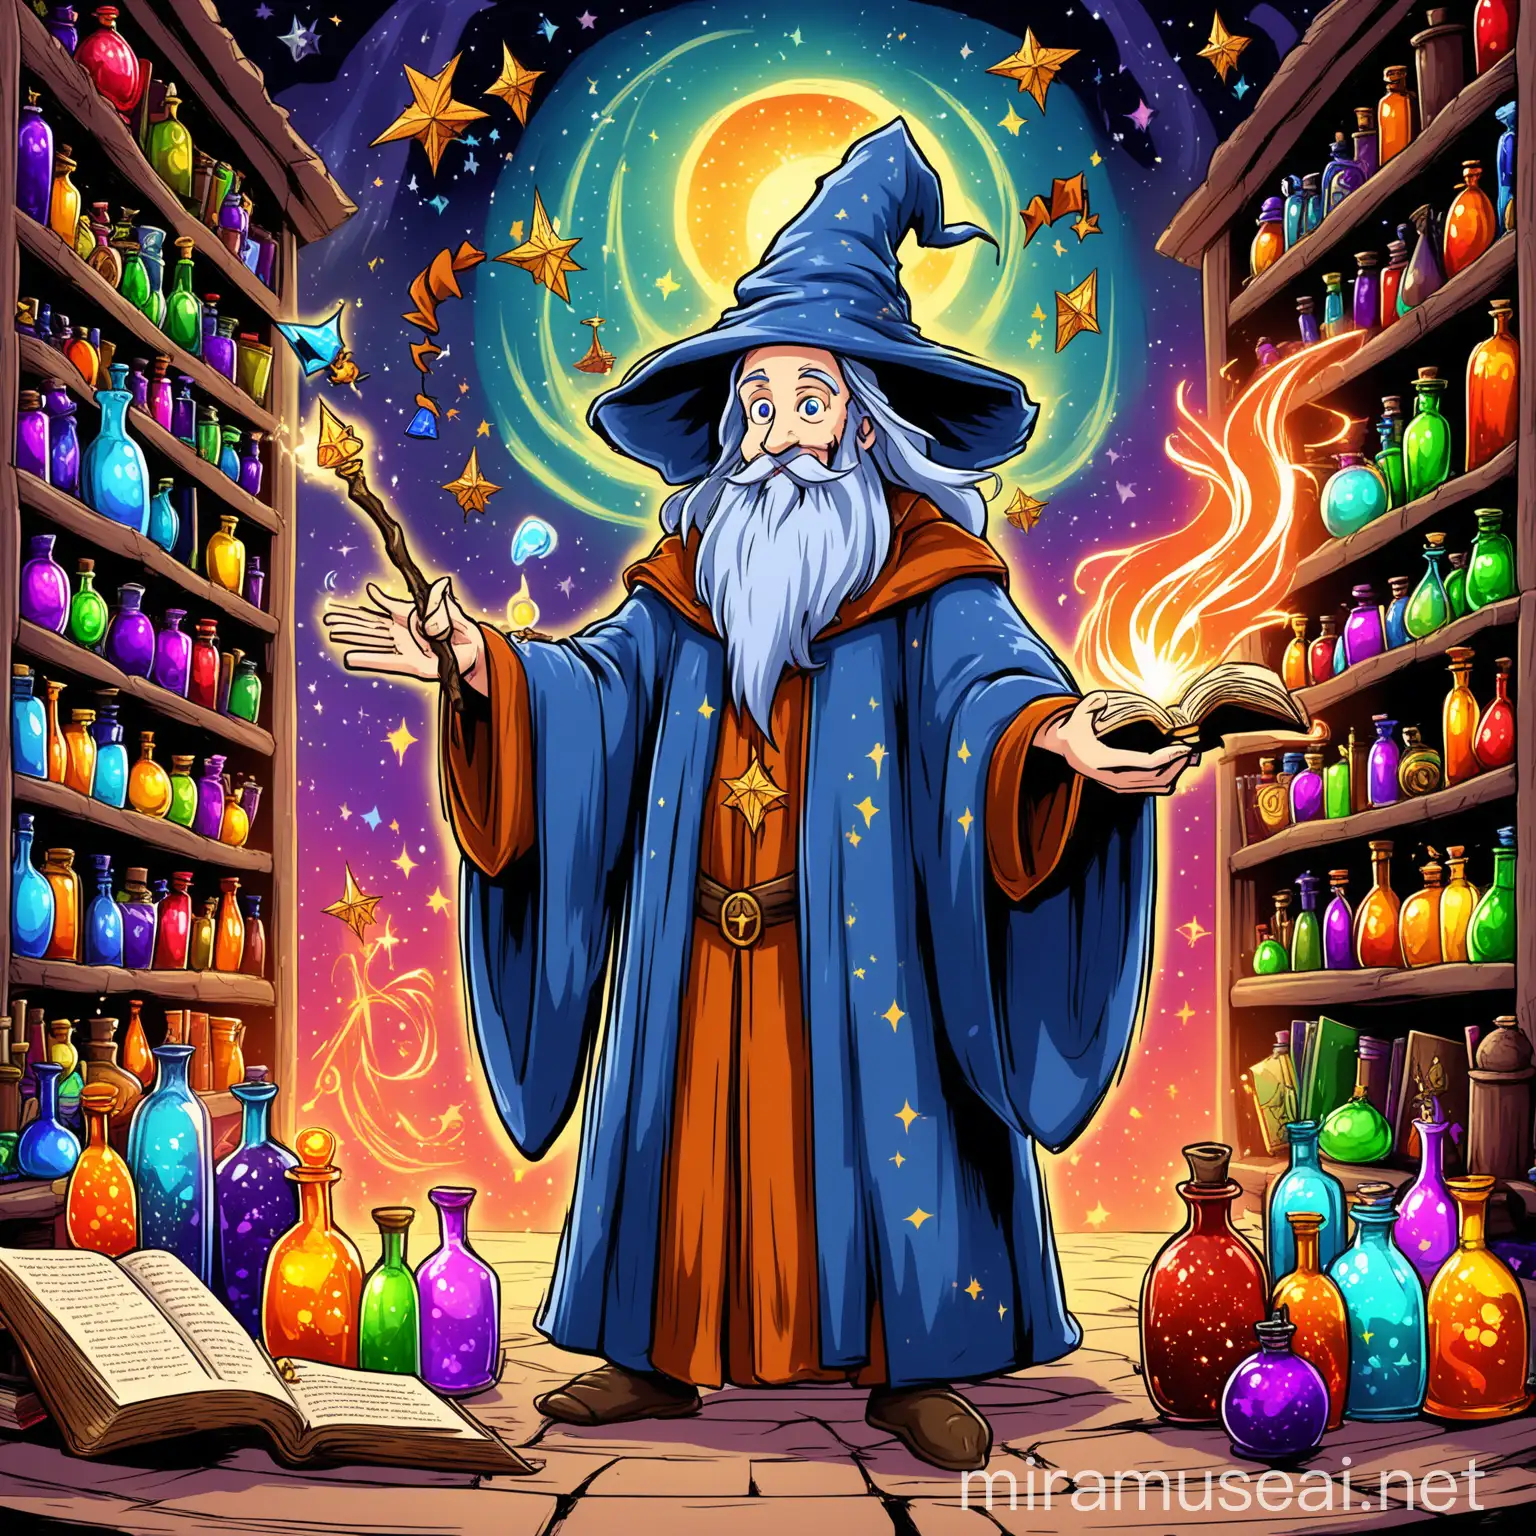 Colorful Cartoon Wizard Casting Spell with Potion Bottles and Spell Books